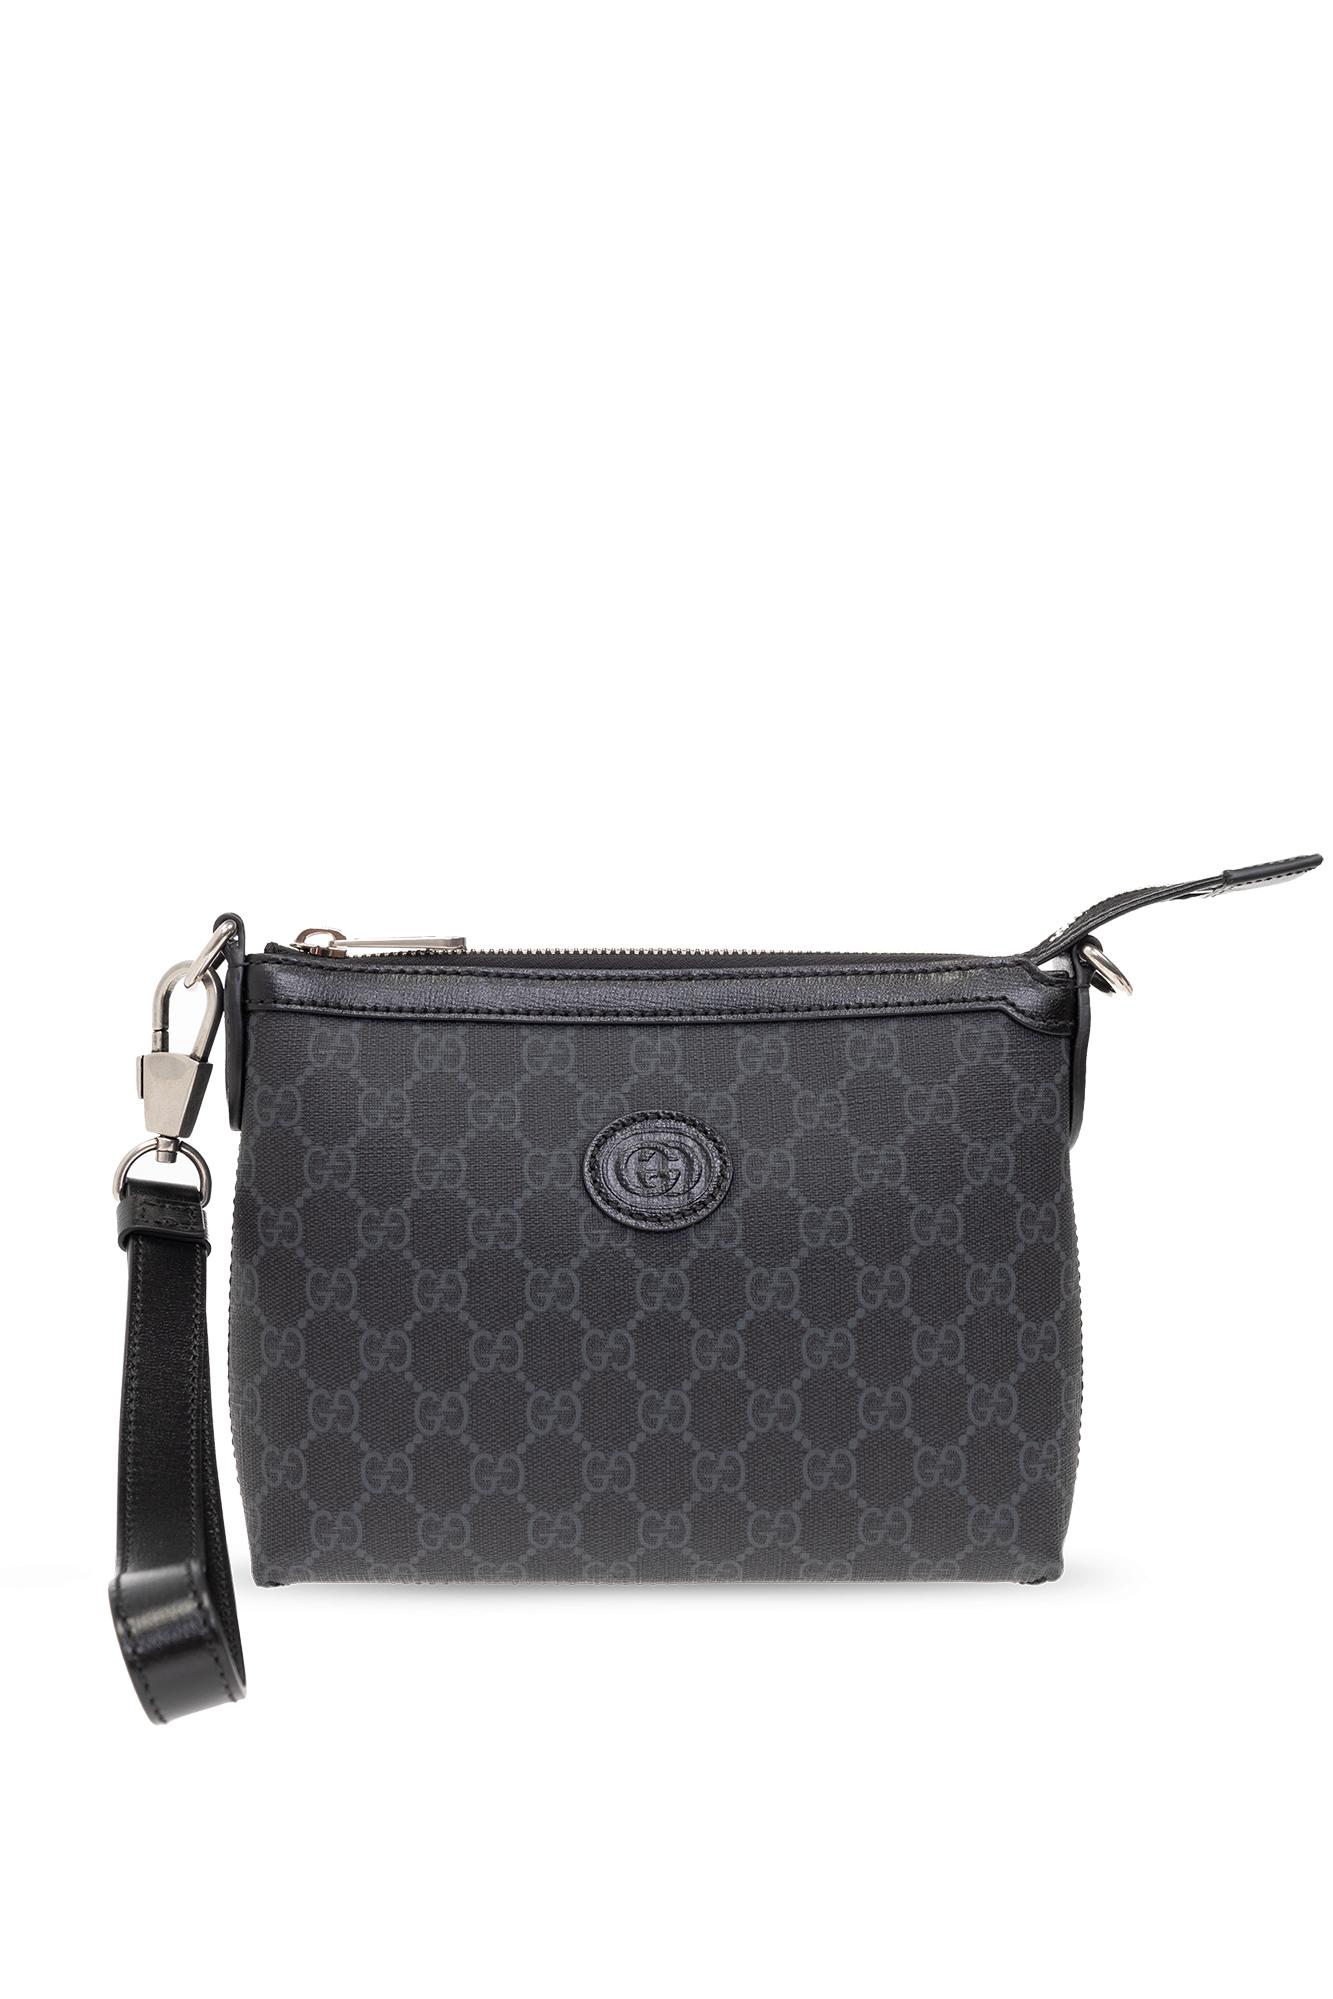 Gucci Shoulder Bag From 'GG Supreme' Canvas in Black | Lyst